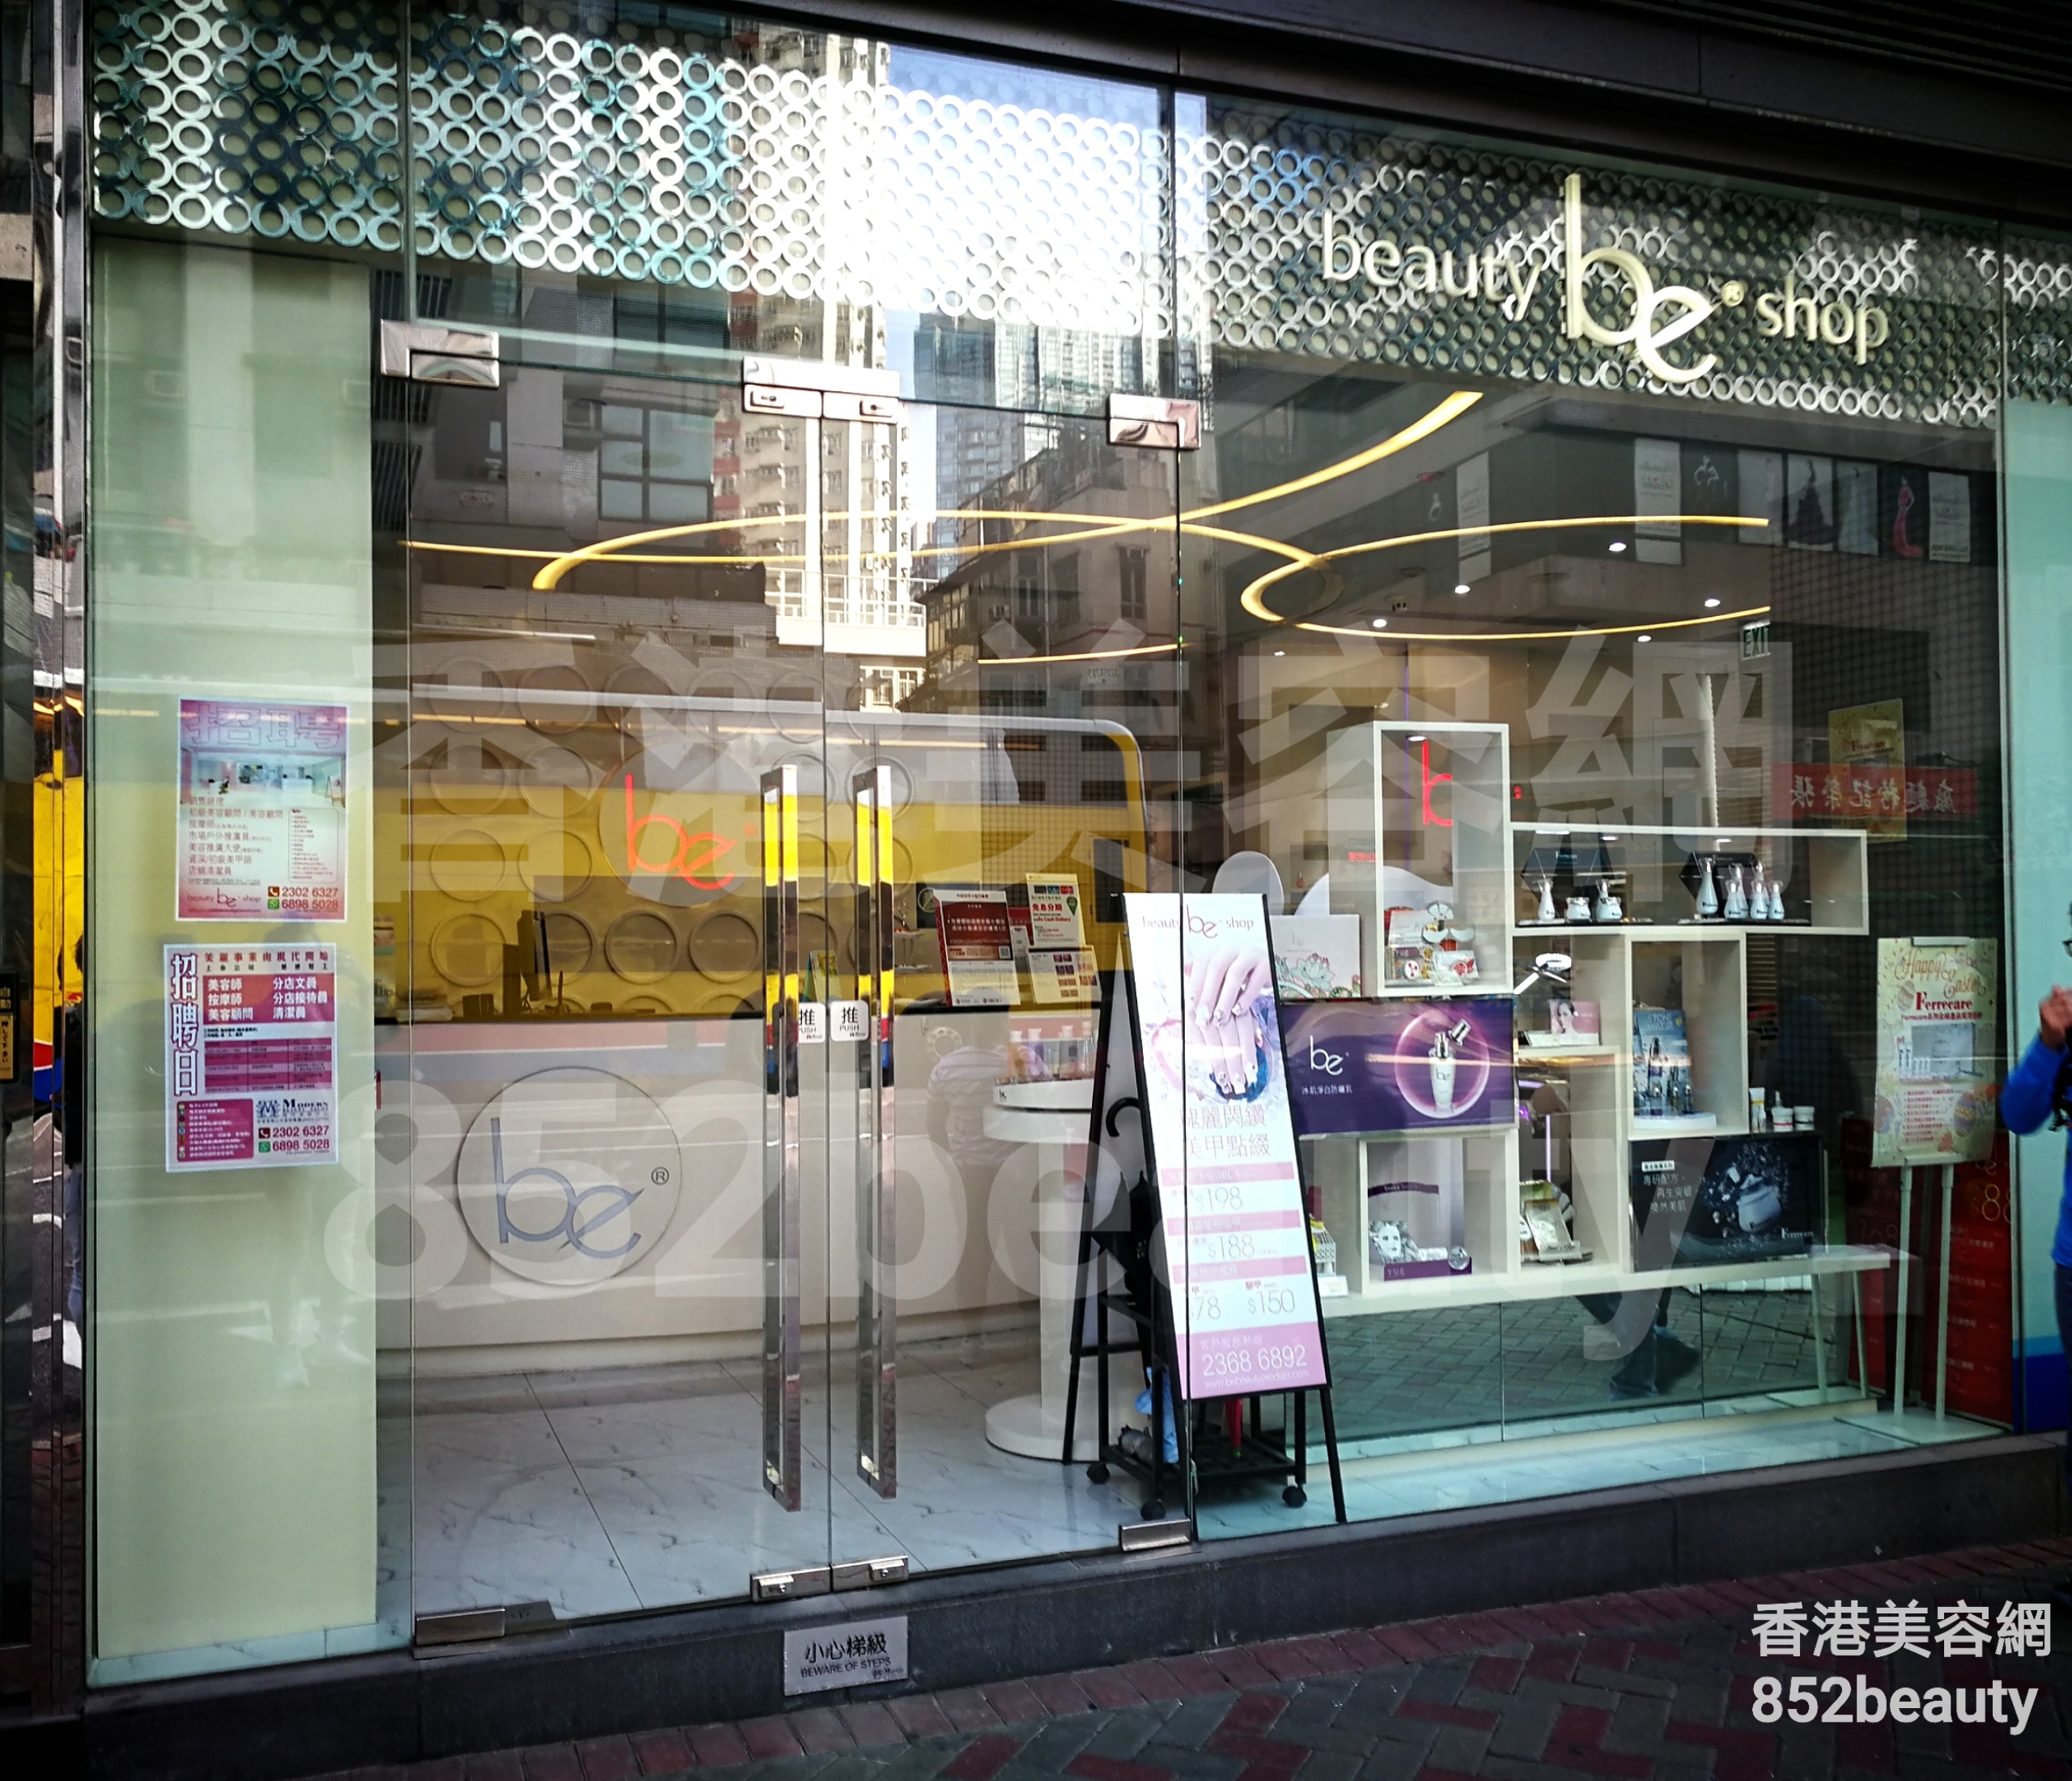 Hand and foot care: be beauty shop (紅磡)